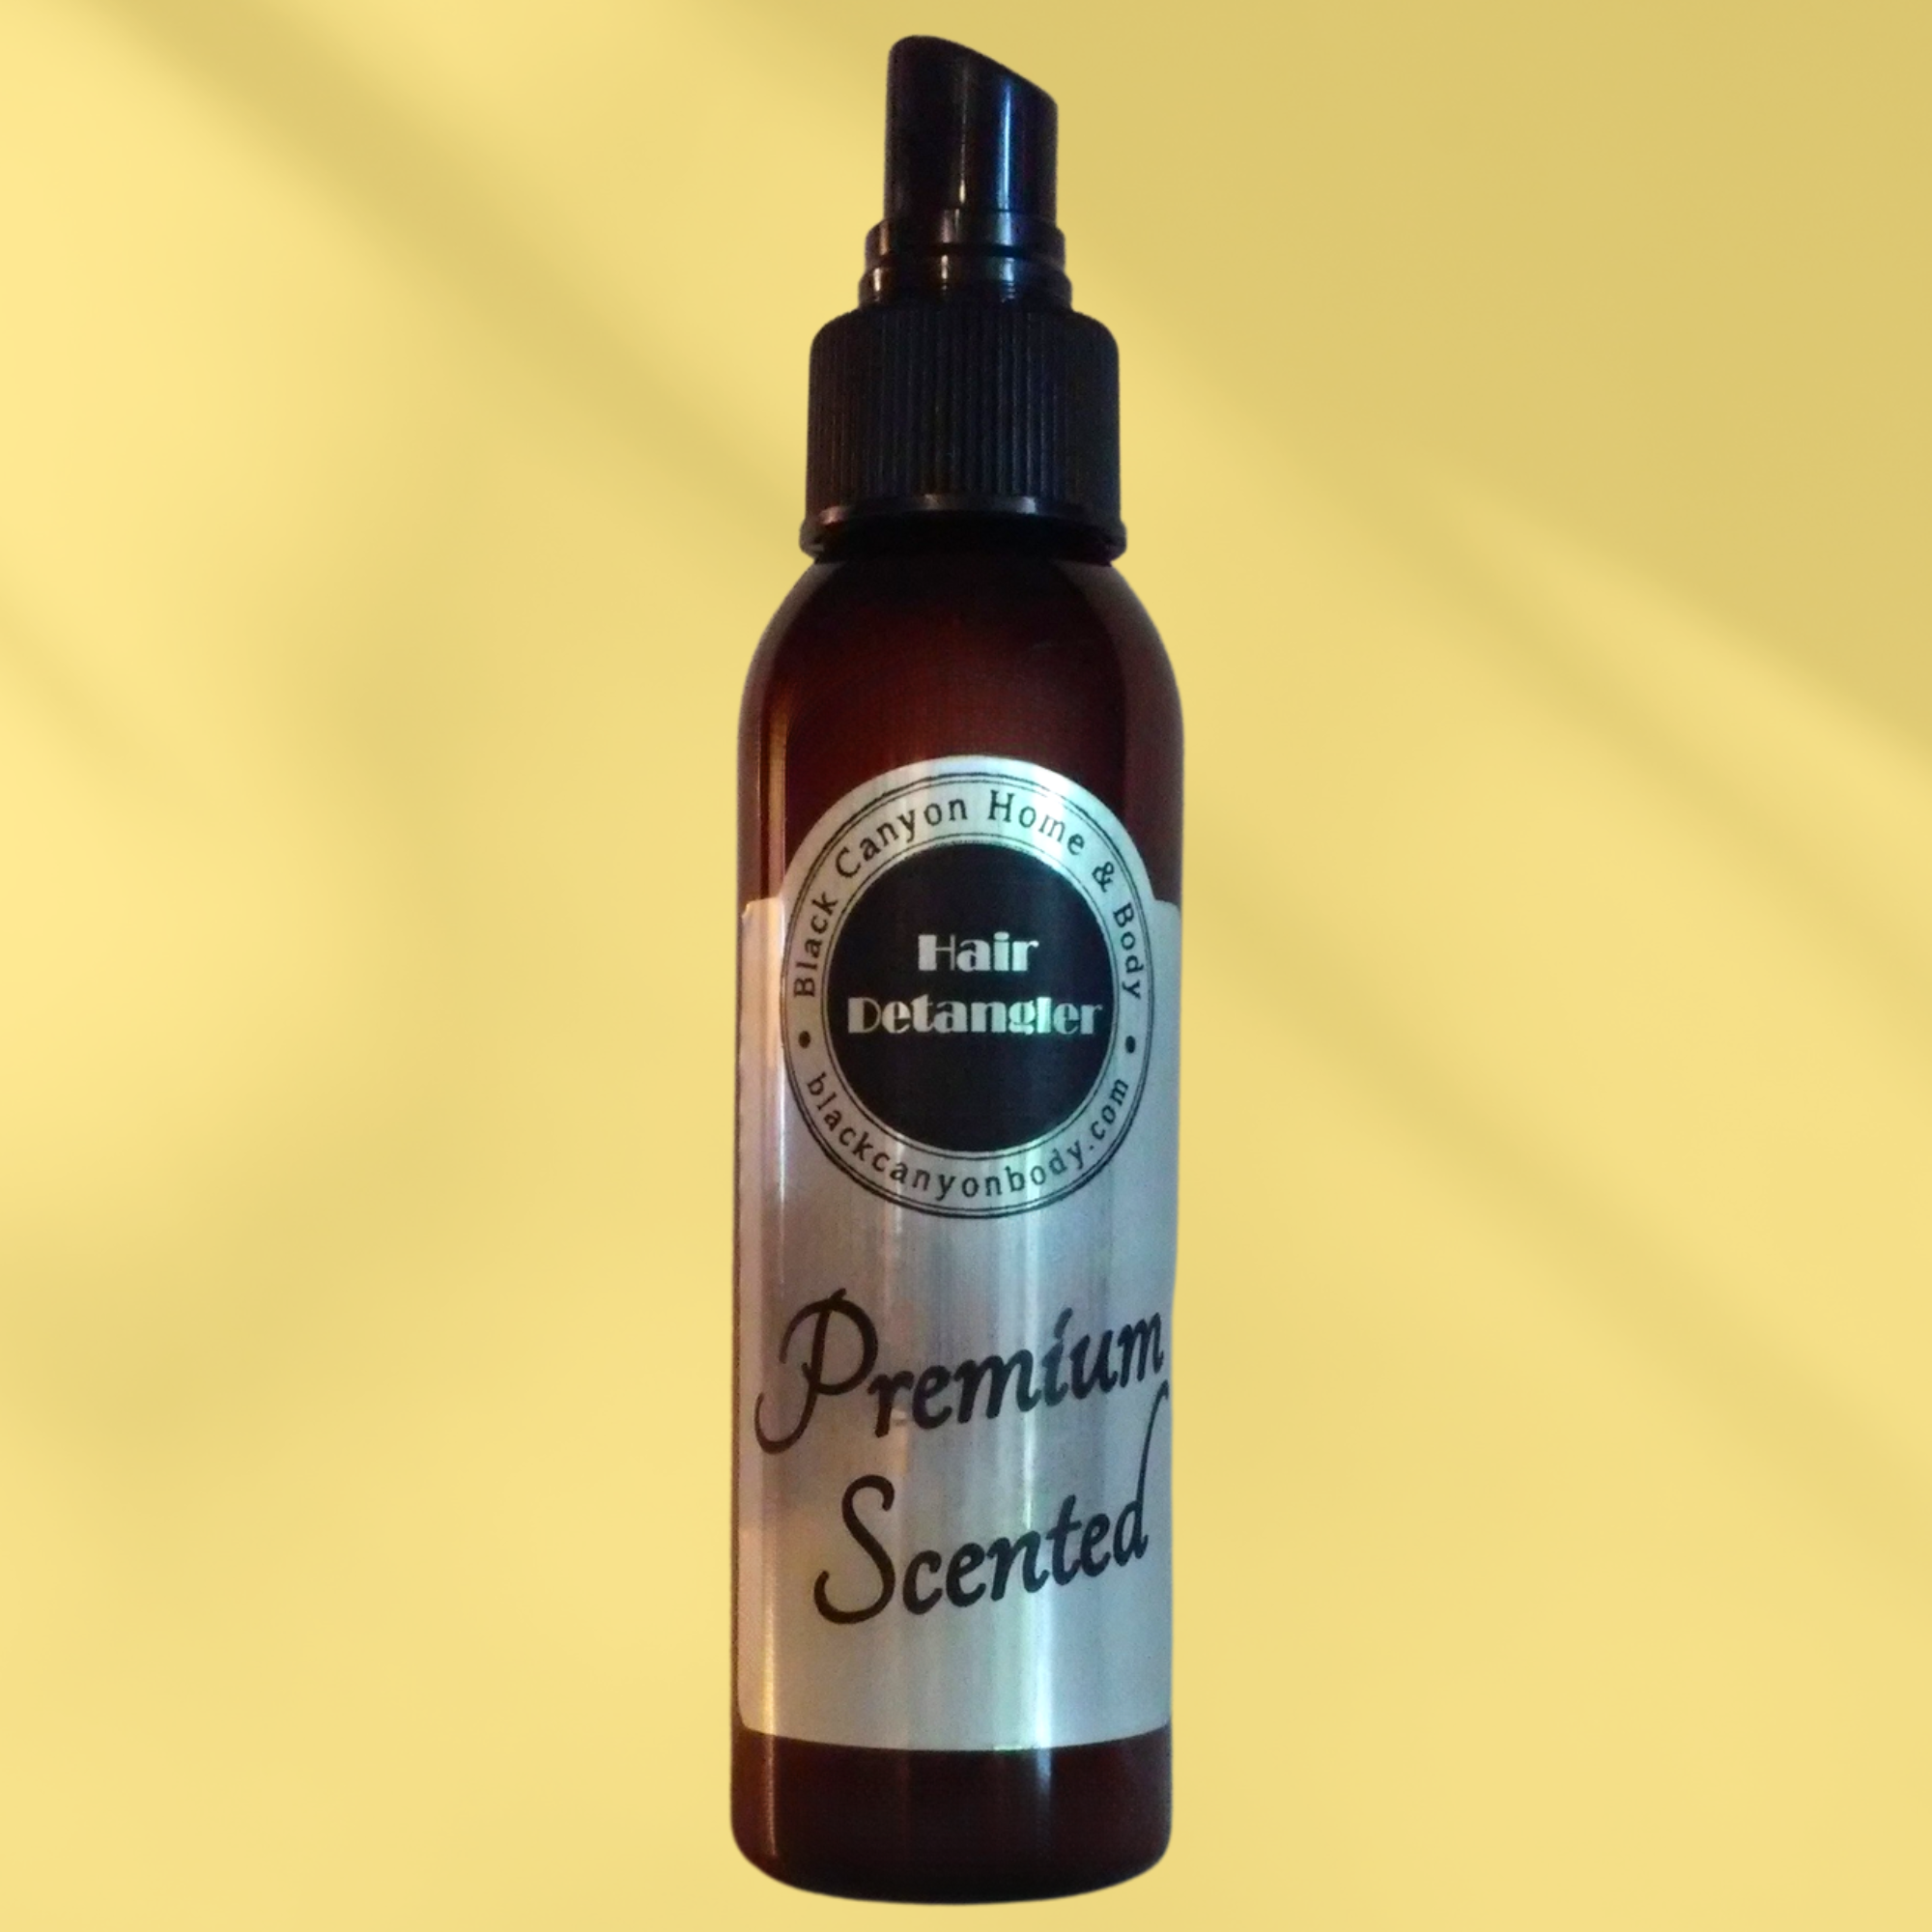 Black Canyon Island Rum Scented Hair Detangler Spray with Olive Oil